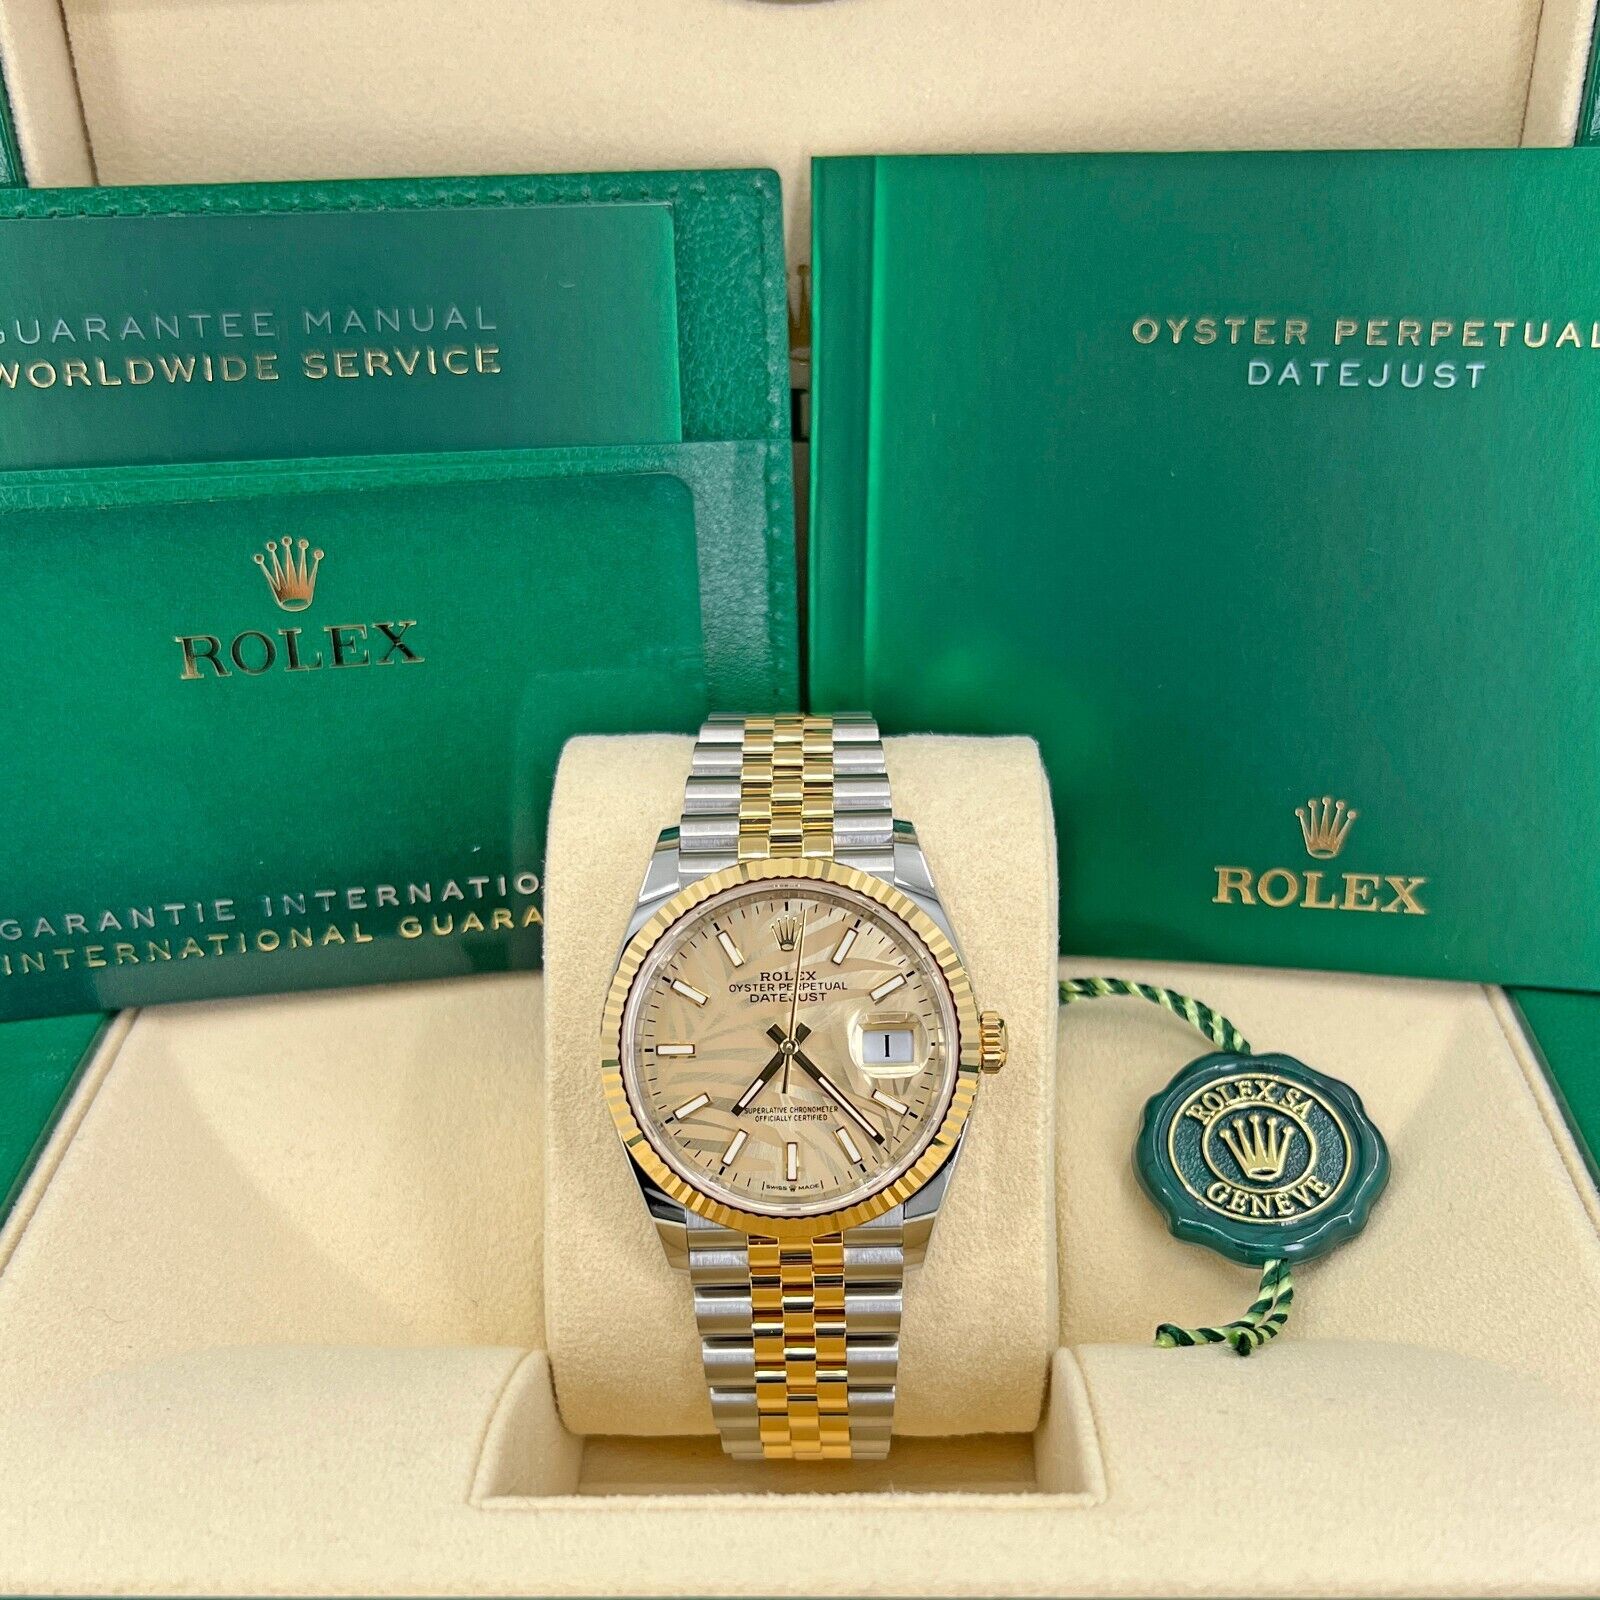 Rolex Datejust 36, 18K Yellow Gold and Stainless Steel, 36mm, Golden, Palm Motif Dial, Ref#126233-0037